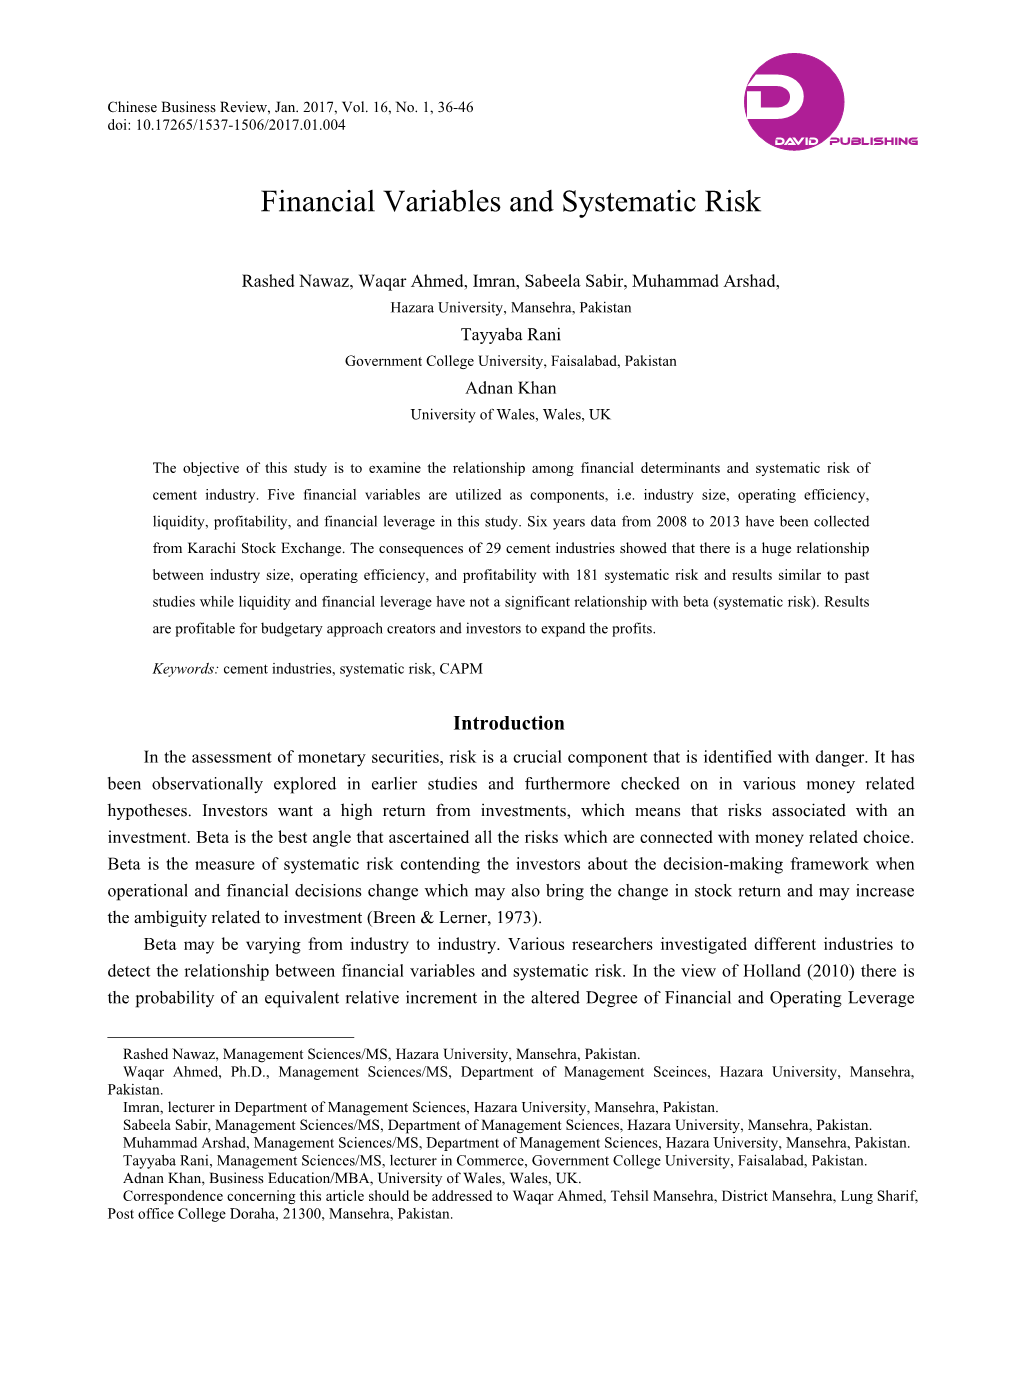 Financial Variables and Systematic Risk